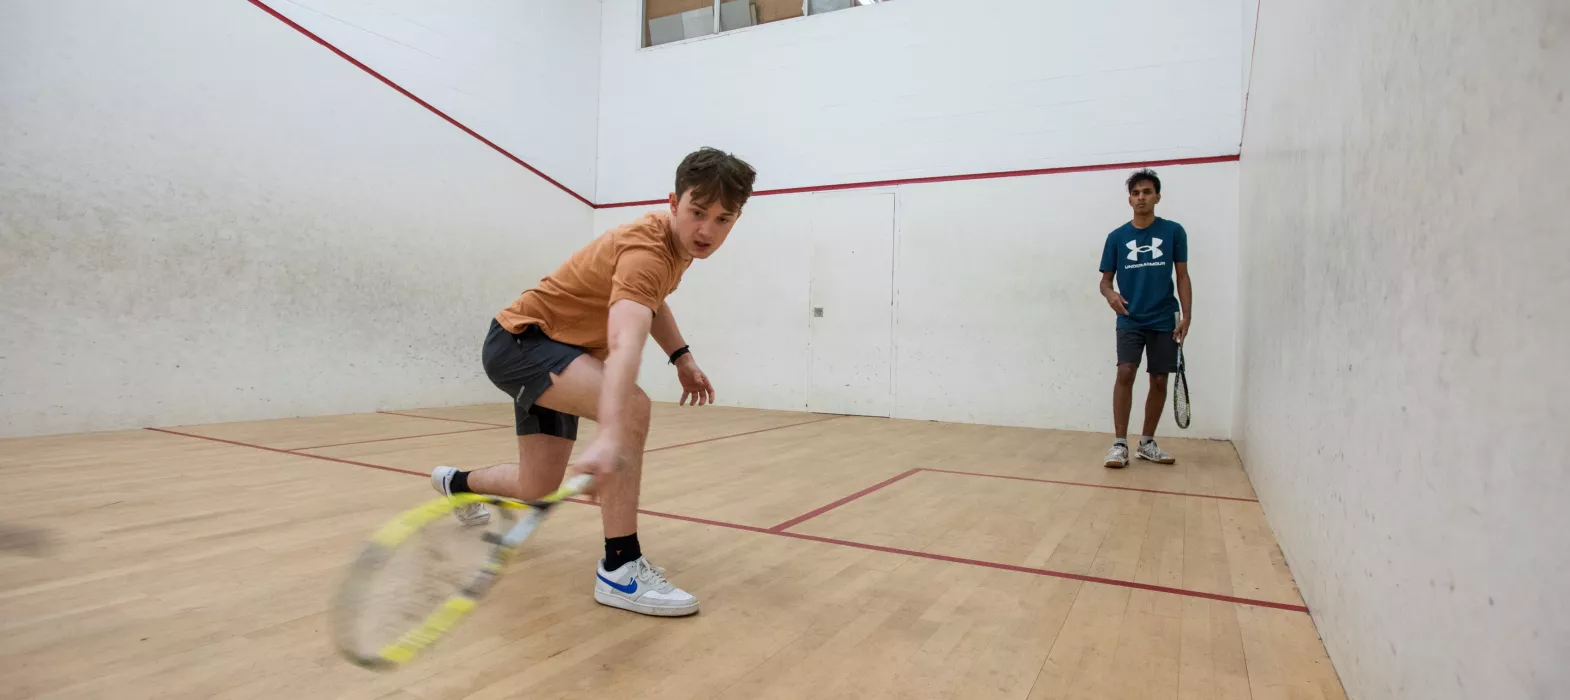 Two students play squash in New College squash courts